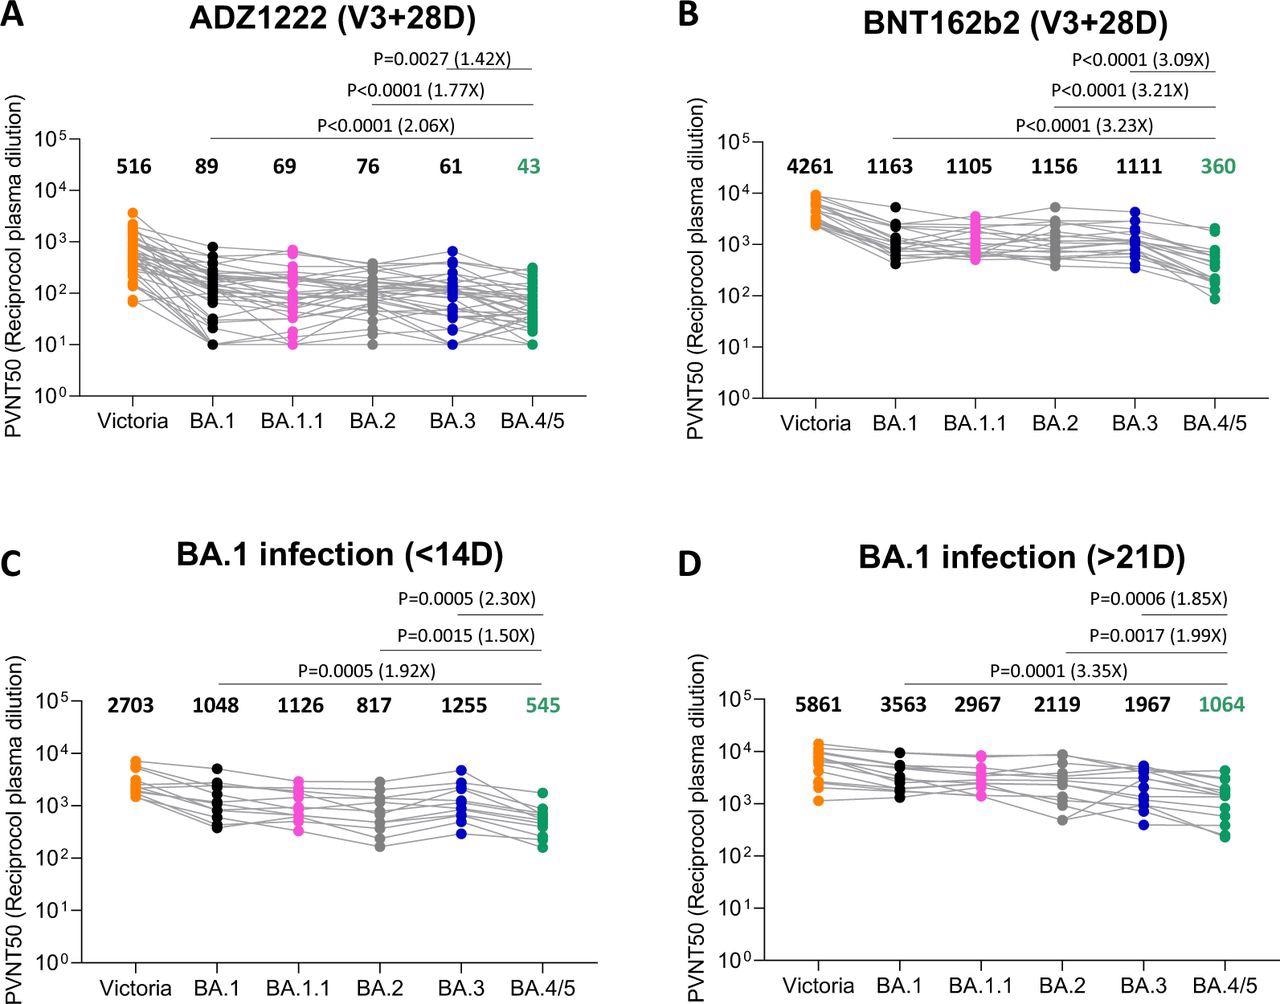 Pseudoviral neutralization assays of BA.4/5 by vaccine and BA.1 immune serum. IC50 values for the indicated viruses using serum obtained from vaccinees 28 days following their third dose of vaccine (A) AstraZeneca AZD AZD1222 (n=41), (B) 4 weeks after the third dose of Pfizer BNT162b2 (n=20). Serum from volunteers suffering breakthrough BA.1 infection volunteer taken (C) early ≤14 (n=12) days from symptom onset (median 13 days) (D) late ≥ 21 days from symptom onset (median 38 days)